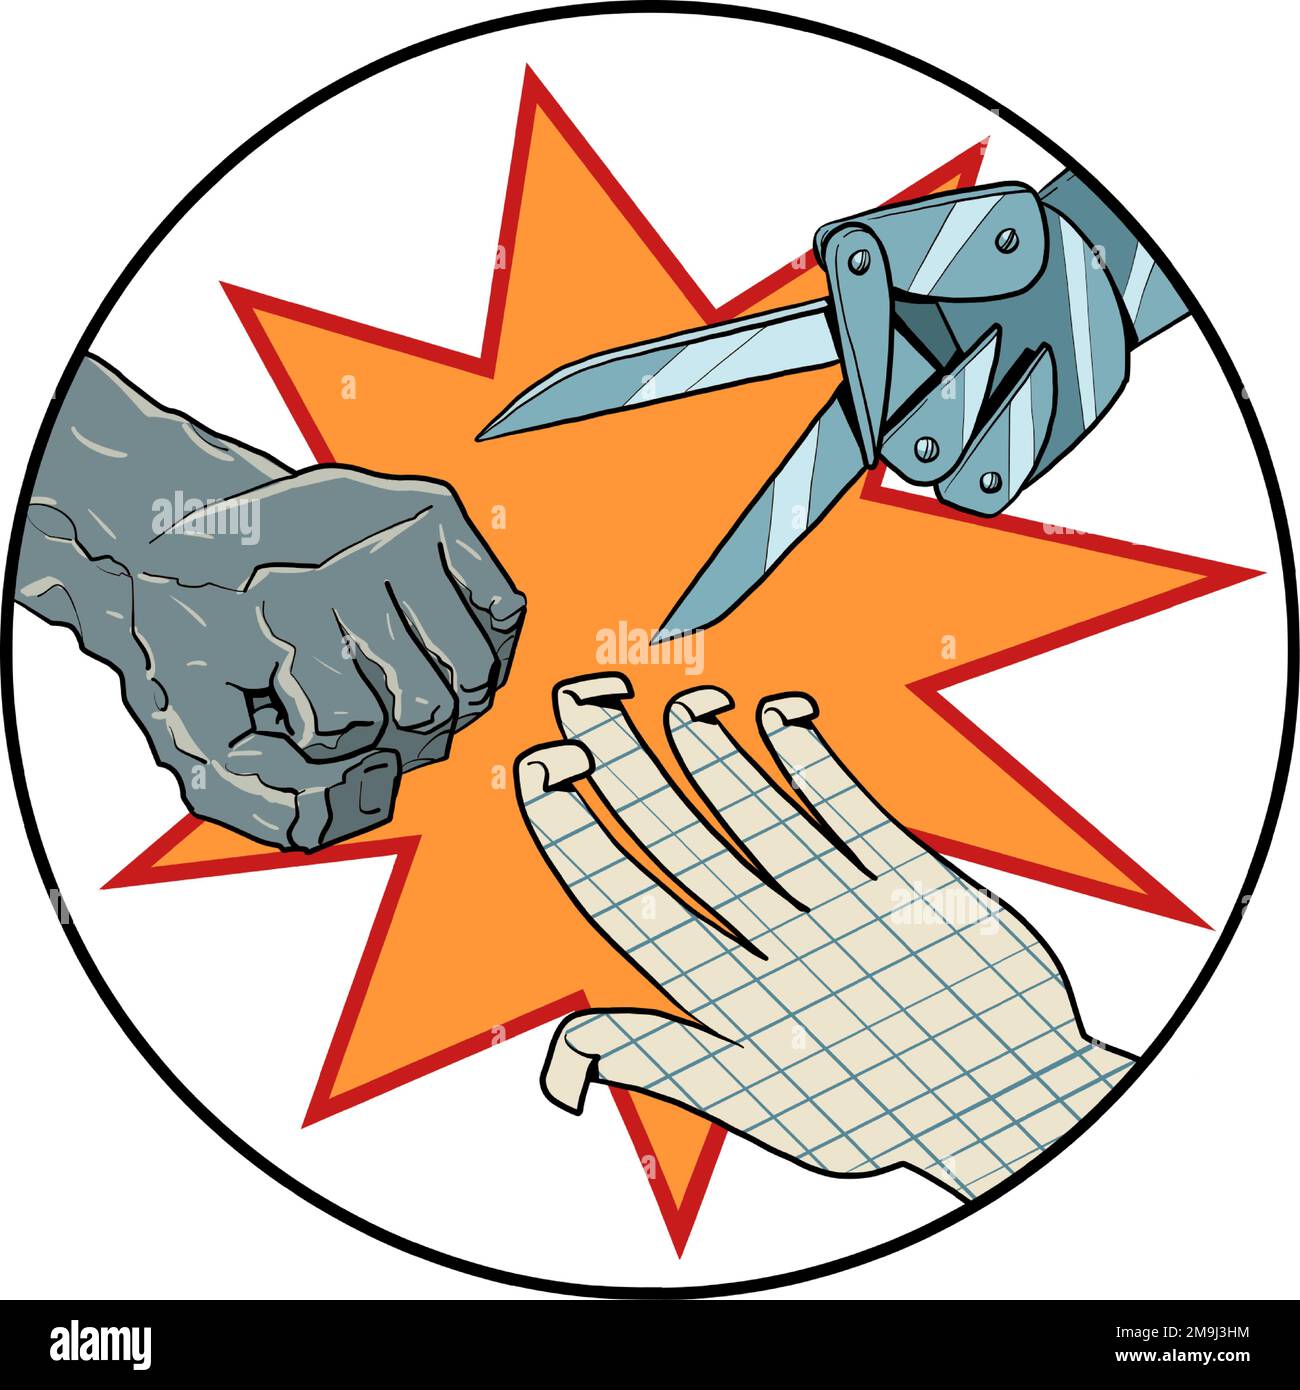 Stone paper scissors from their materials. Democracy. Stock Vector